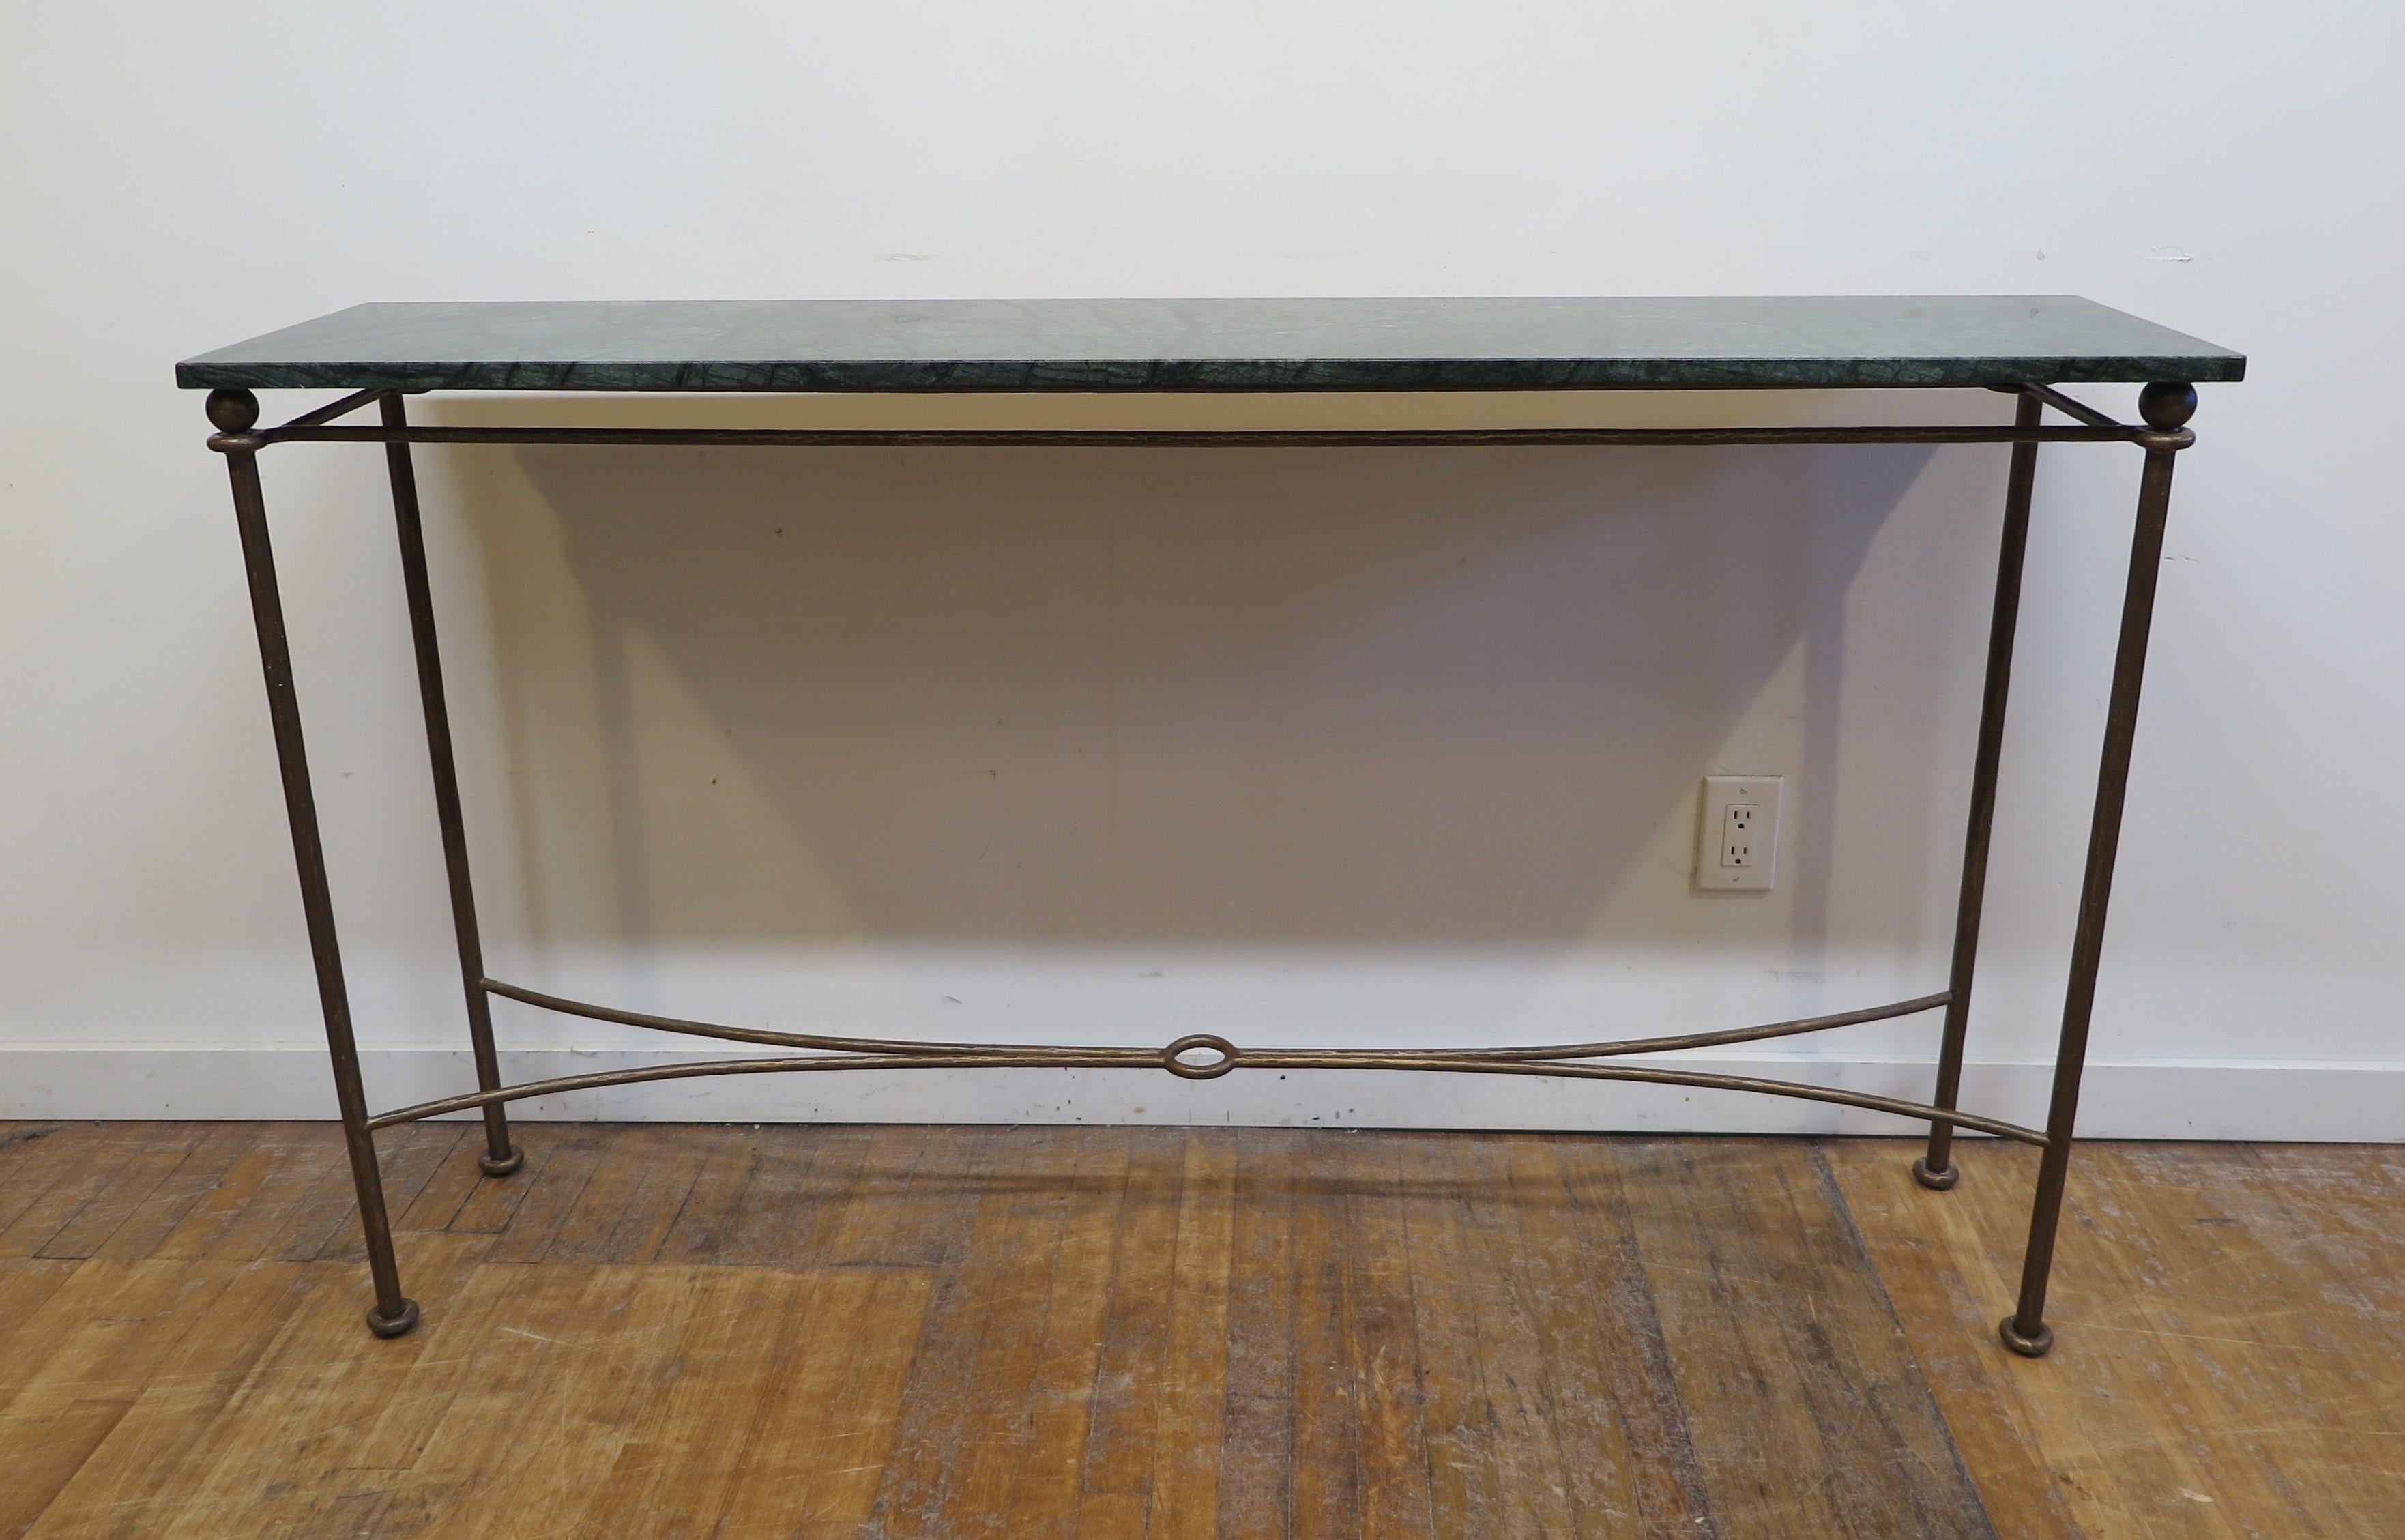 Marble Top Console Table in Art Deco style. Beautiful green marble with extraordinary veining set on bronzed metal frame legs with interesting circle detail to the struts. The bronzed frame has a hand hammered effect to the metal adding a nice